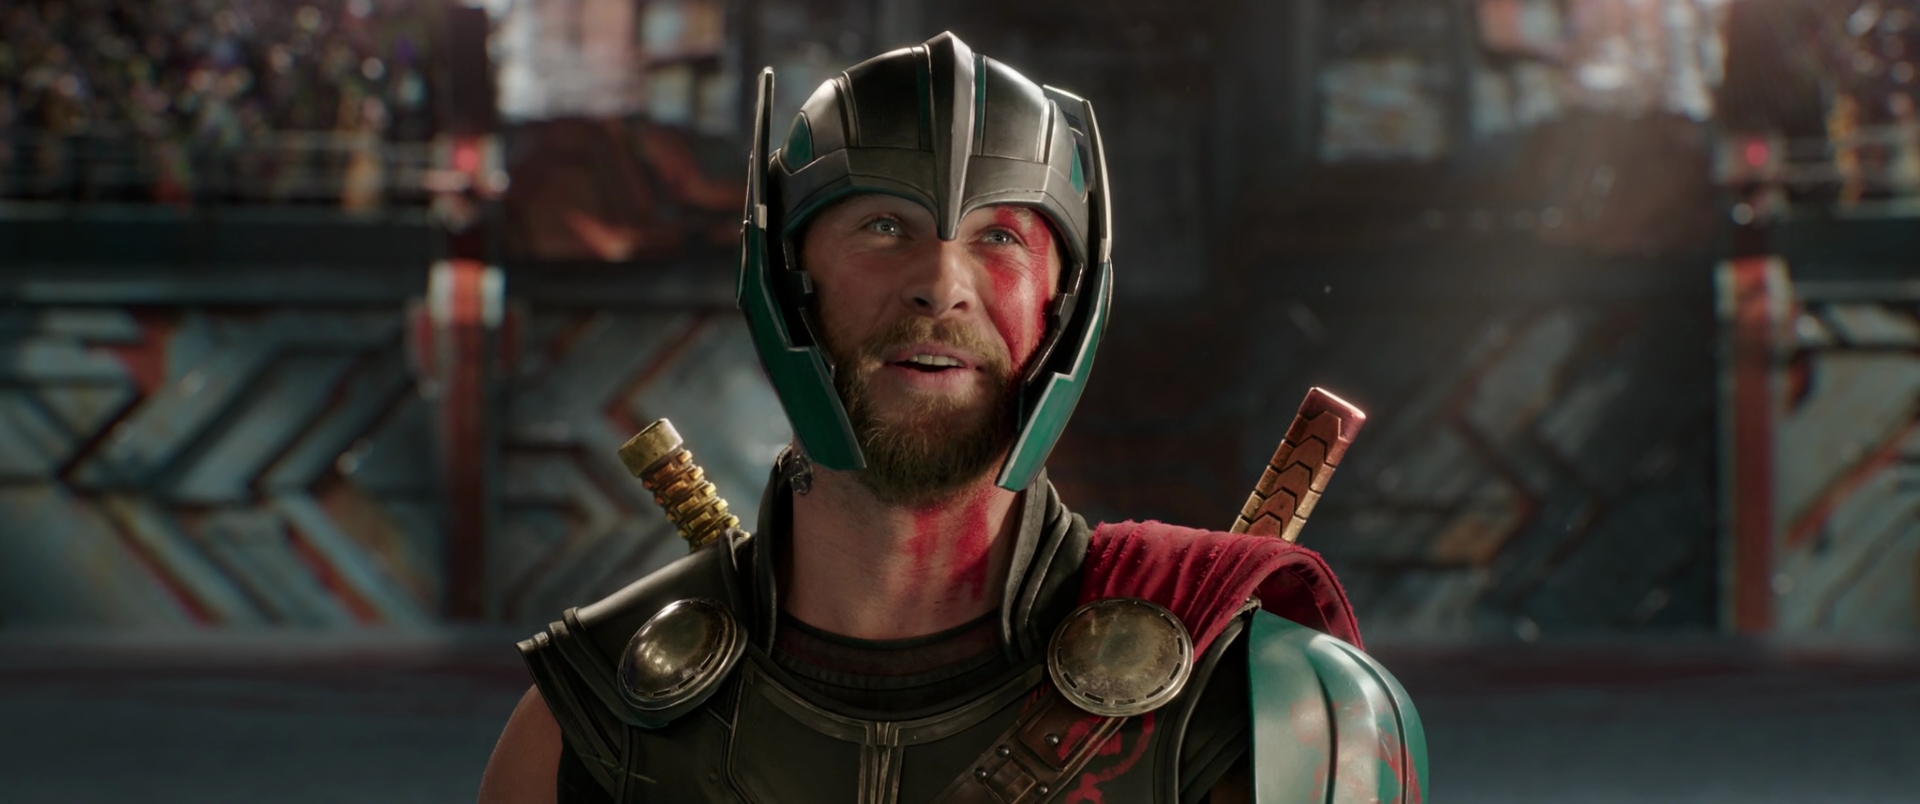 Thor (Chris Hemsworth) is delighted to see a familiar face in Sakaar's coliseum in Thor: Ragnarok (2017), Marvel Entertainment via Blu-ray